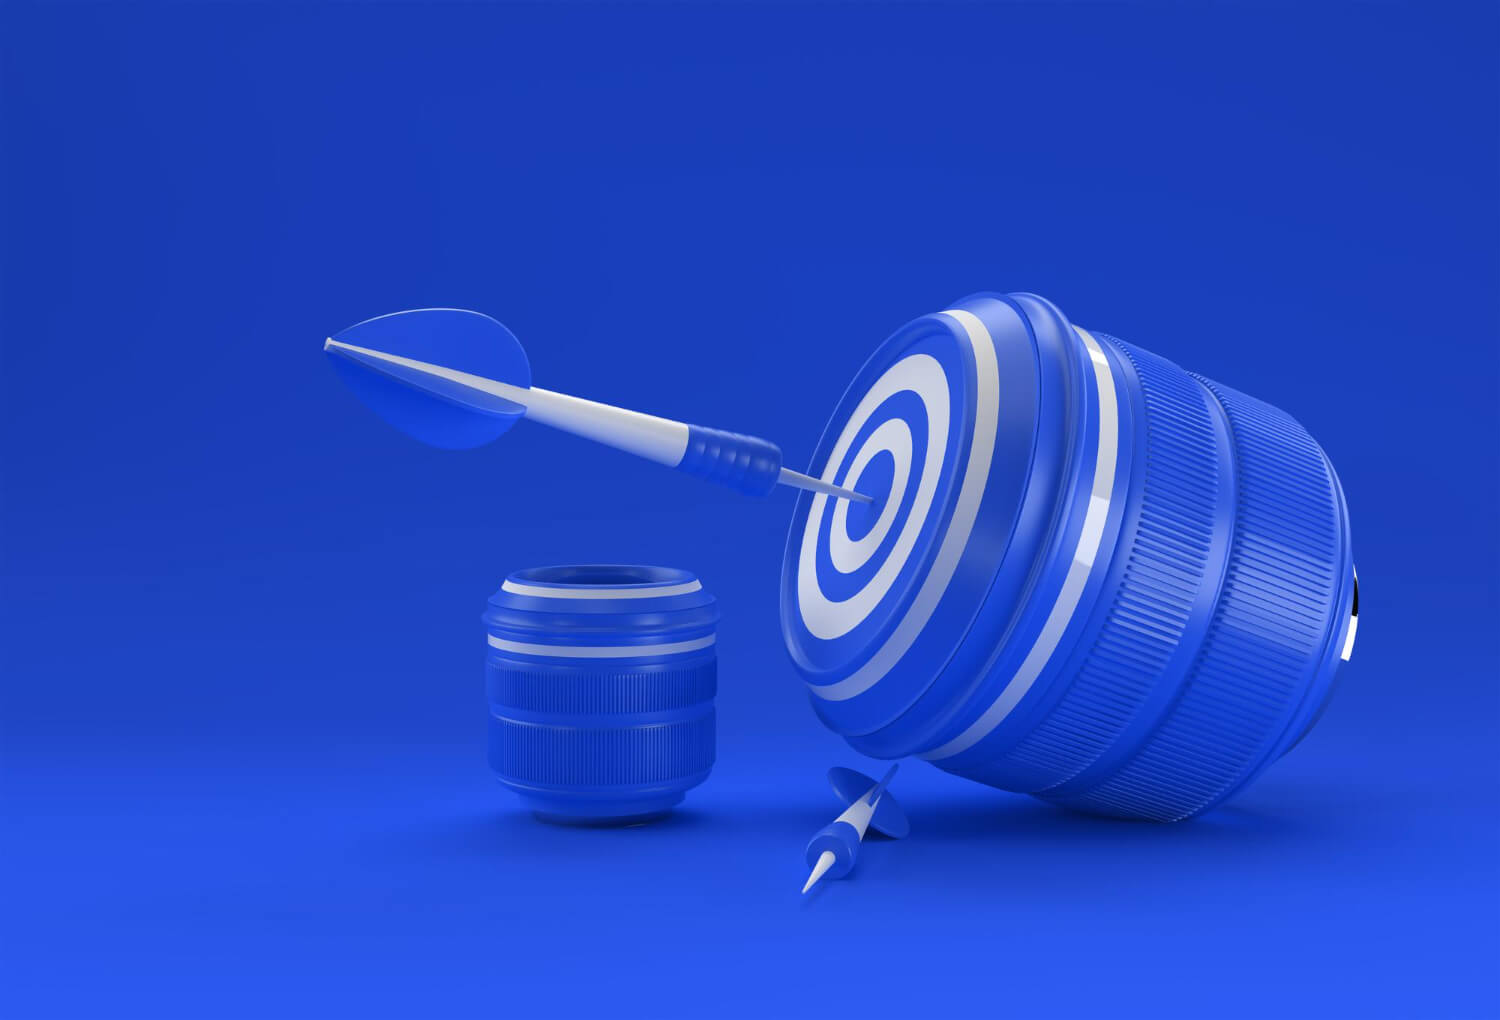 A targeted dart on a camera lens on a blue background